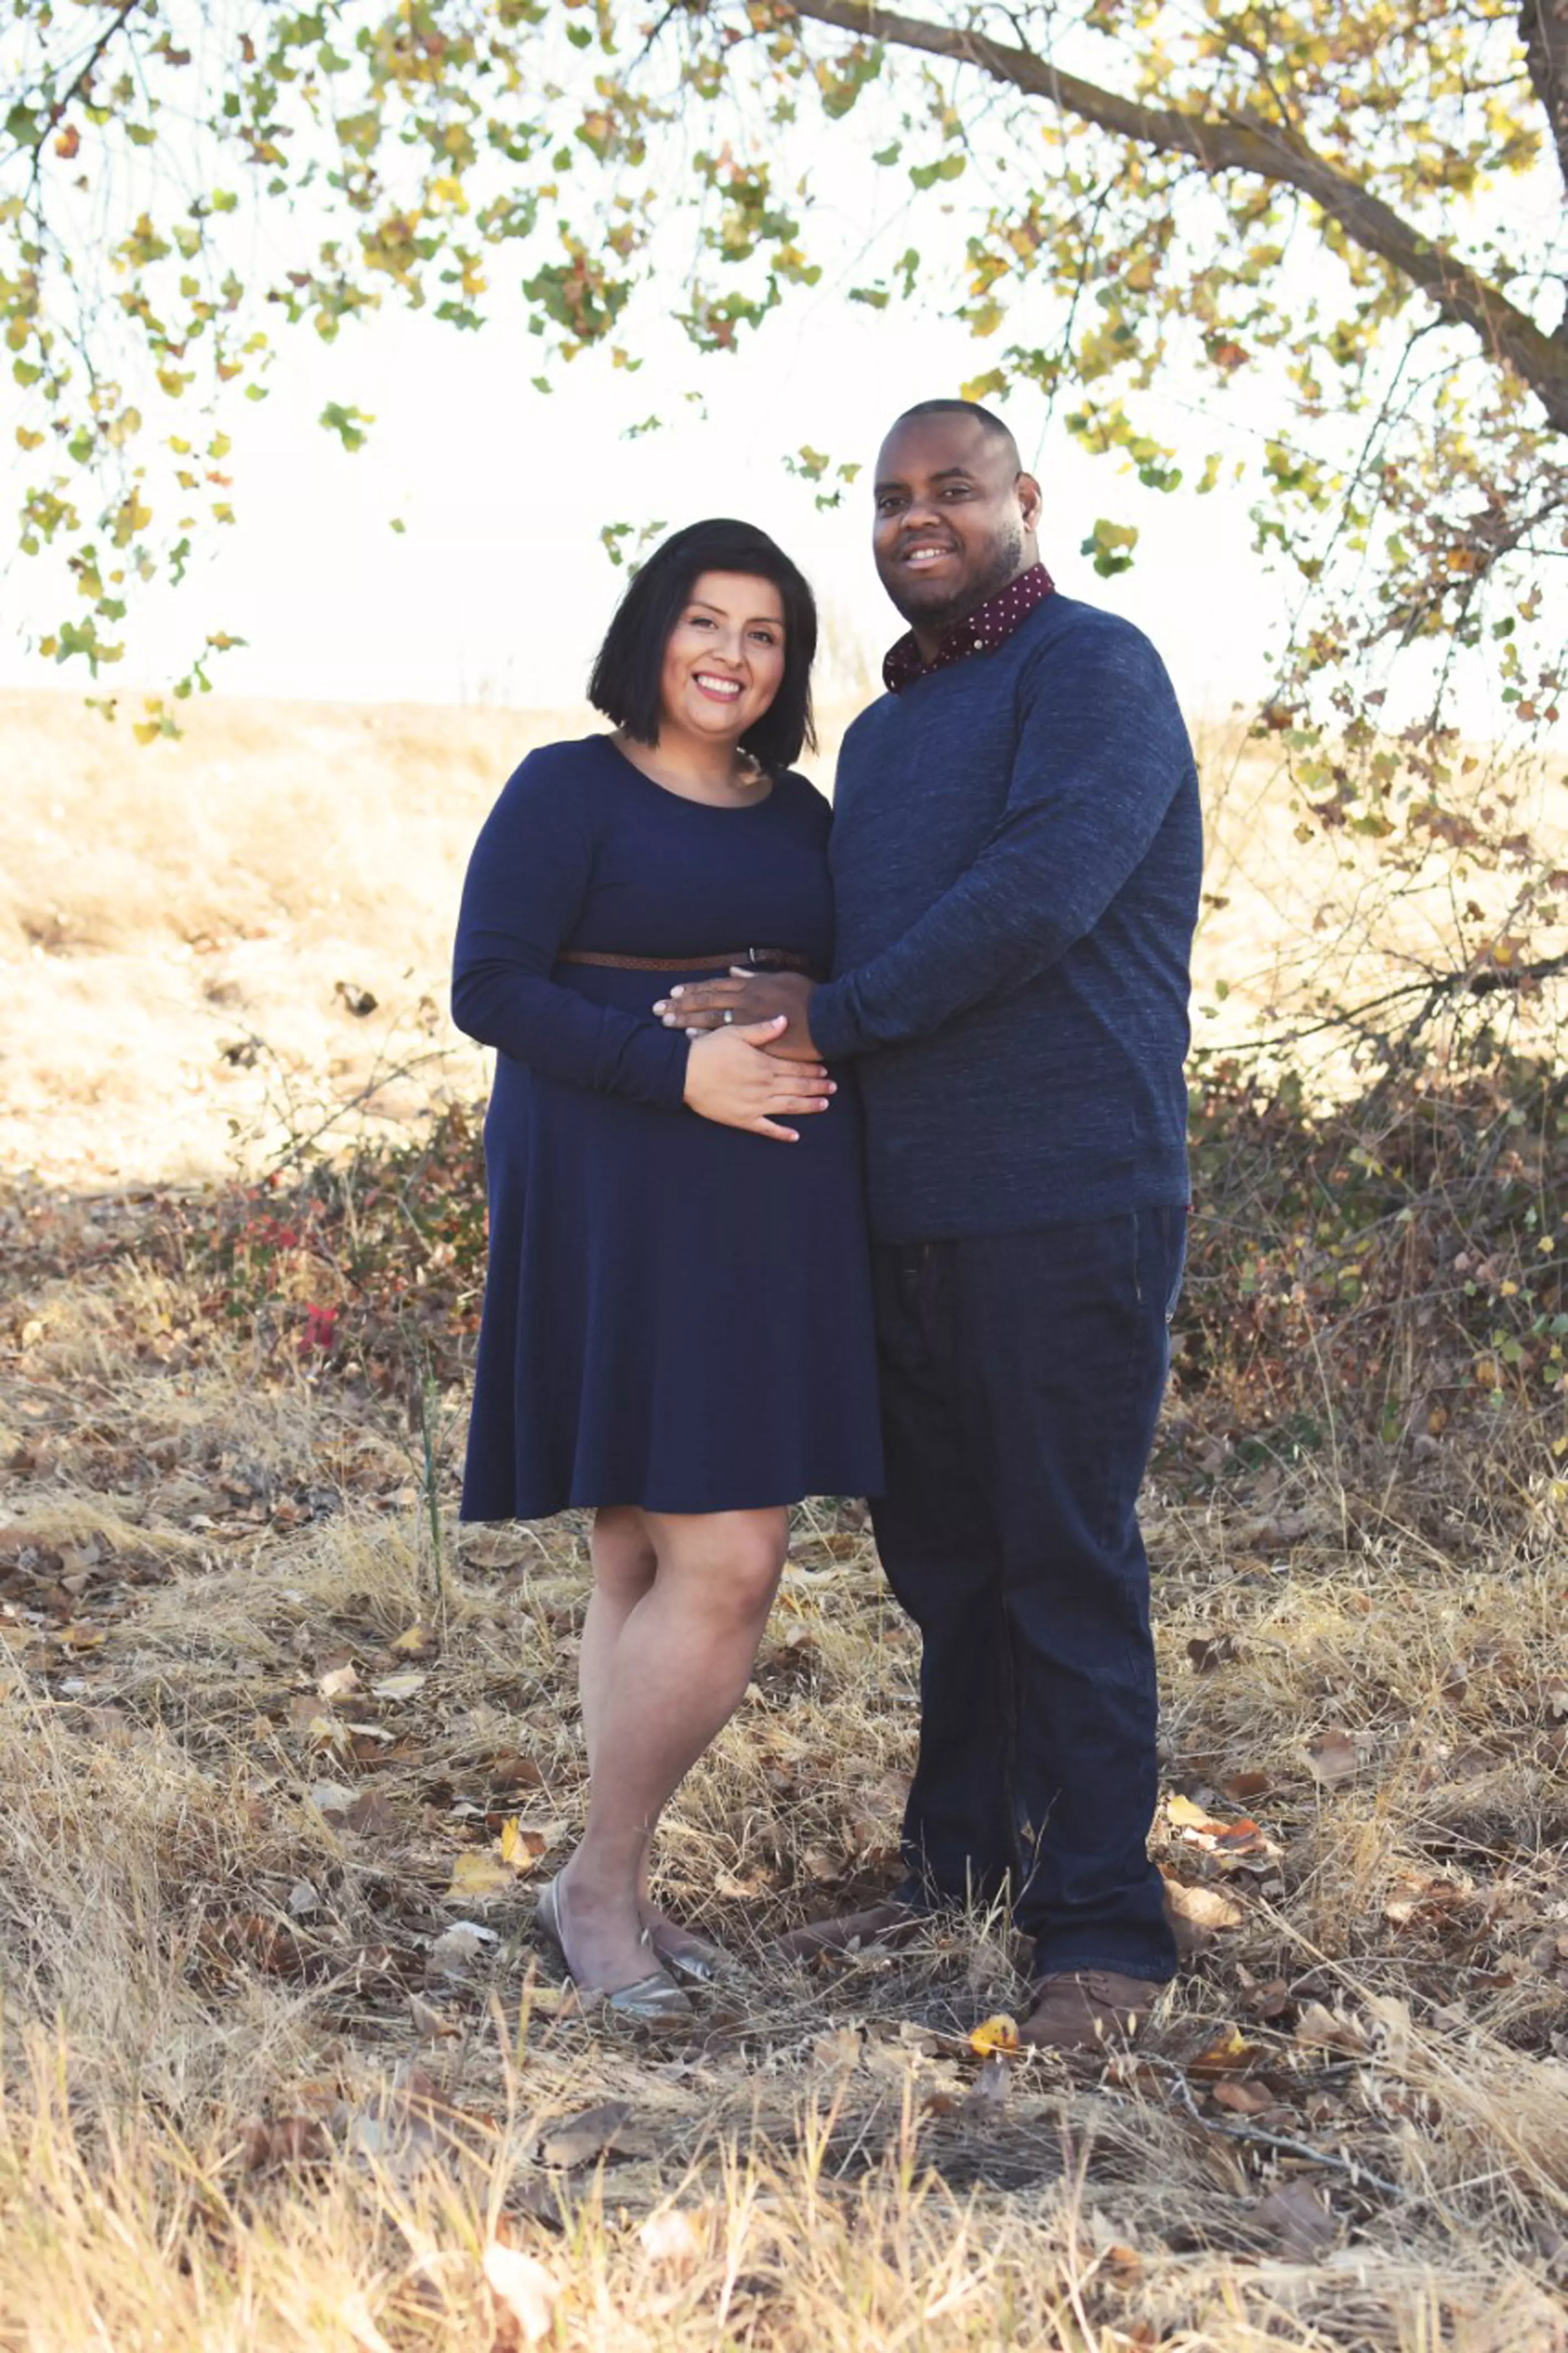 Lizeth and her husband were excited to be expecting twins (